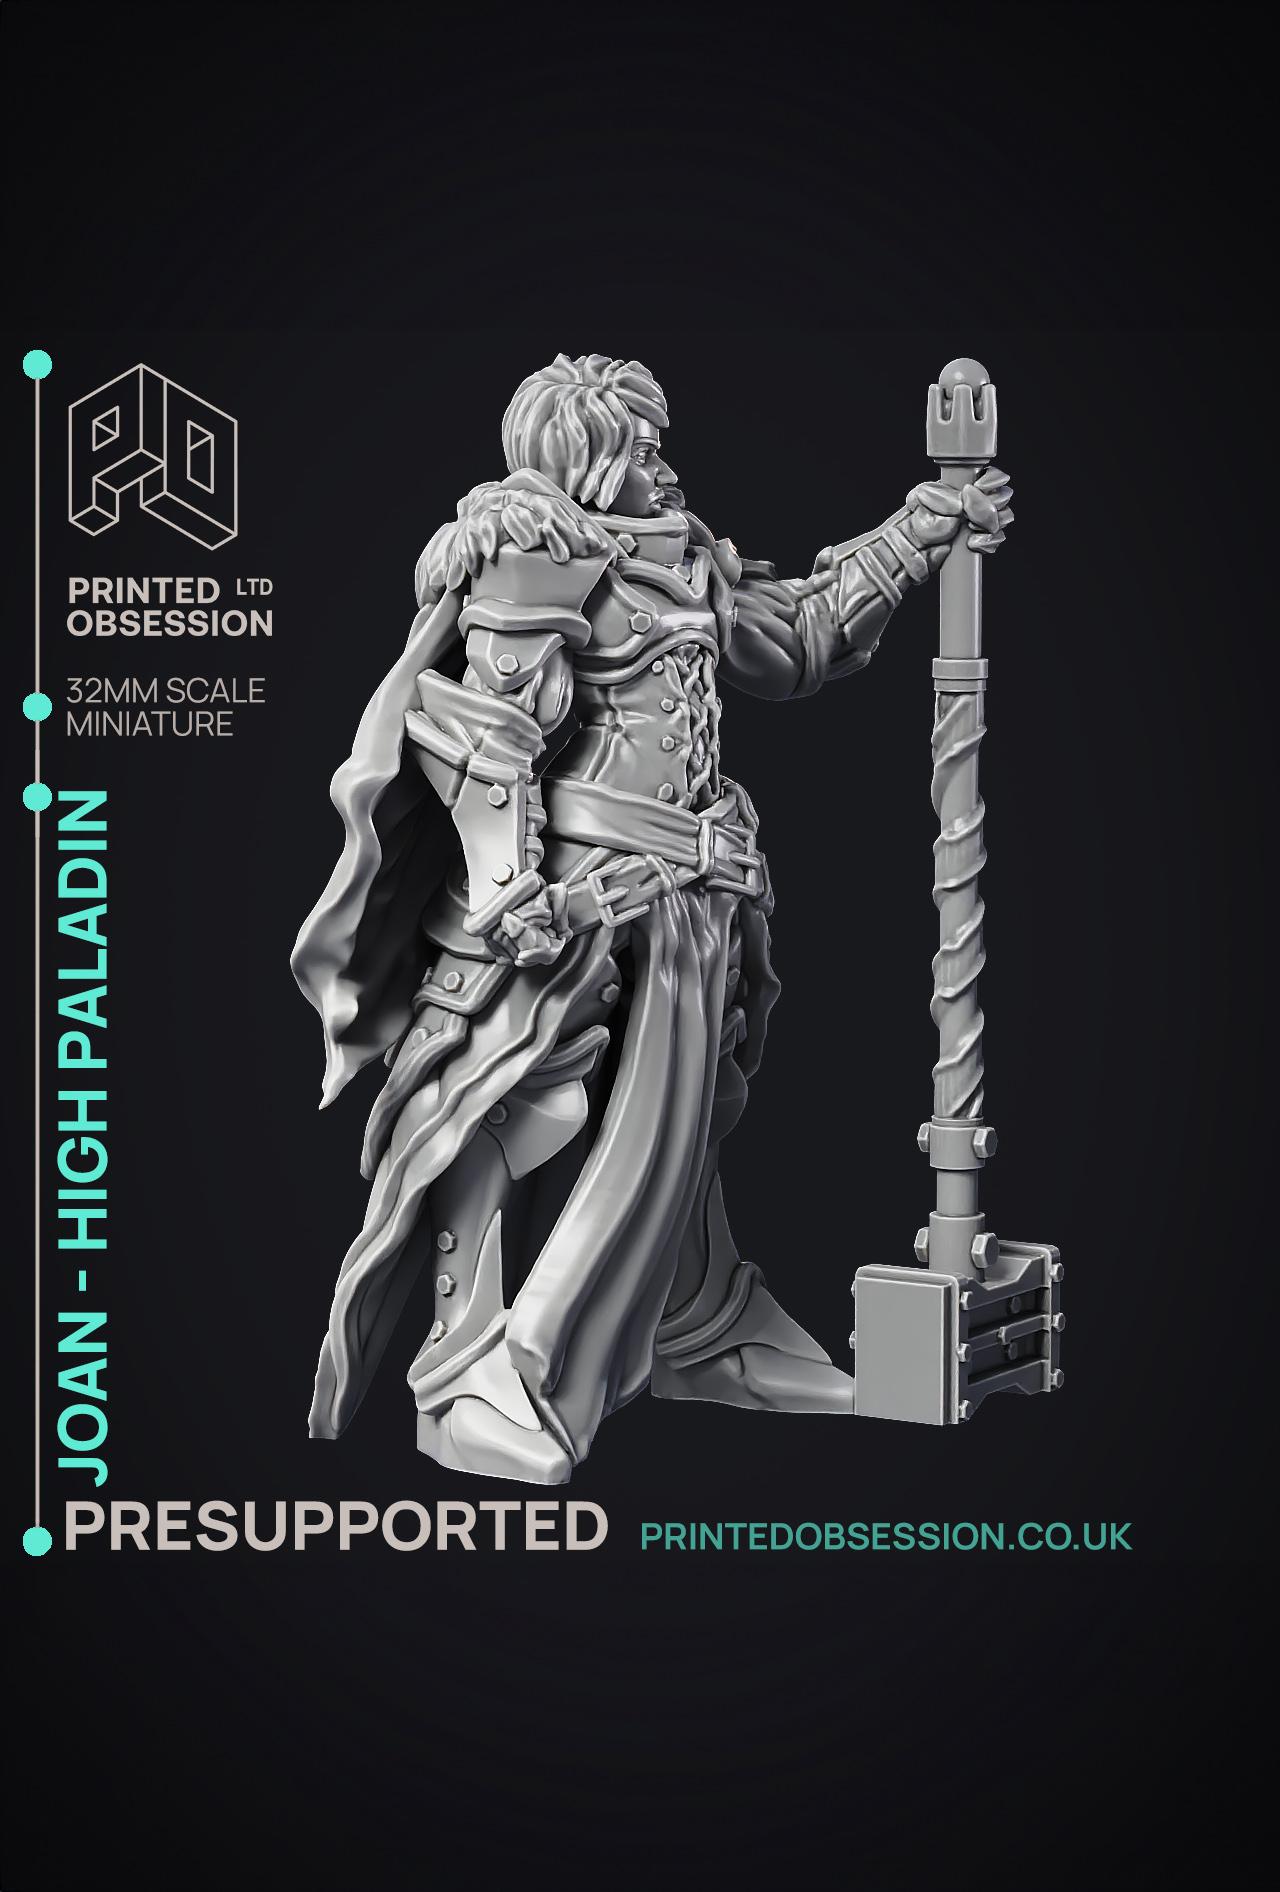 Joan - High Paladin - 2 Model - PRESUPPORTED - 32mm scale 3d model